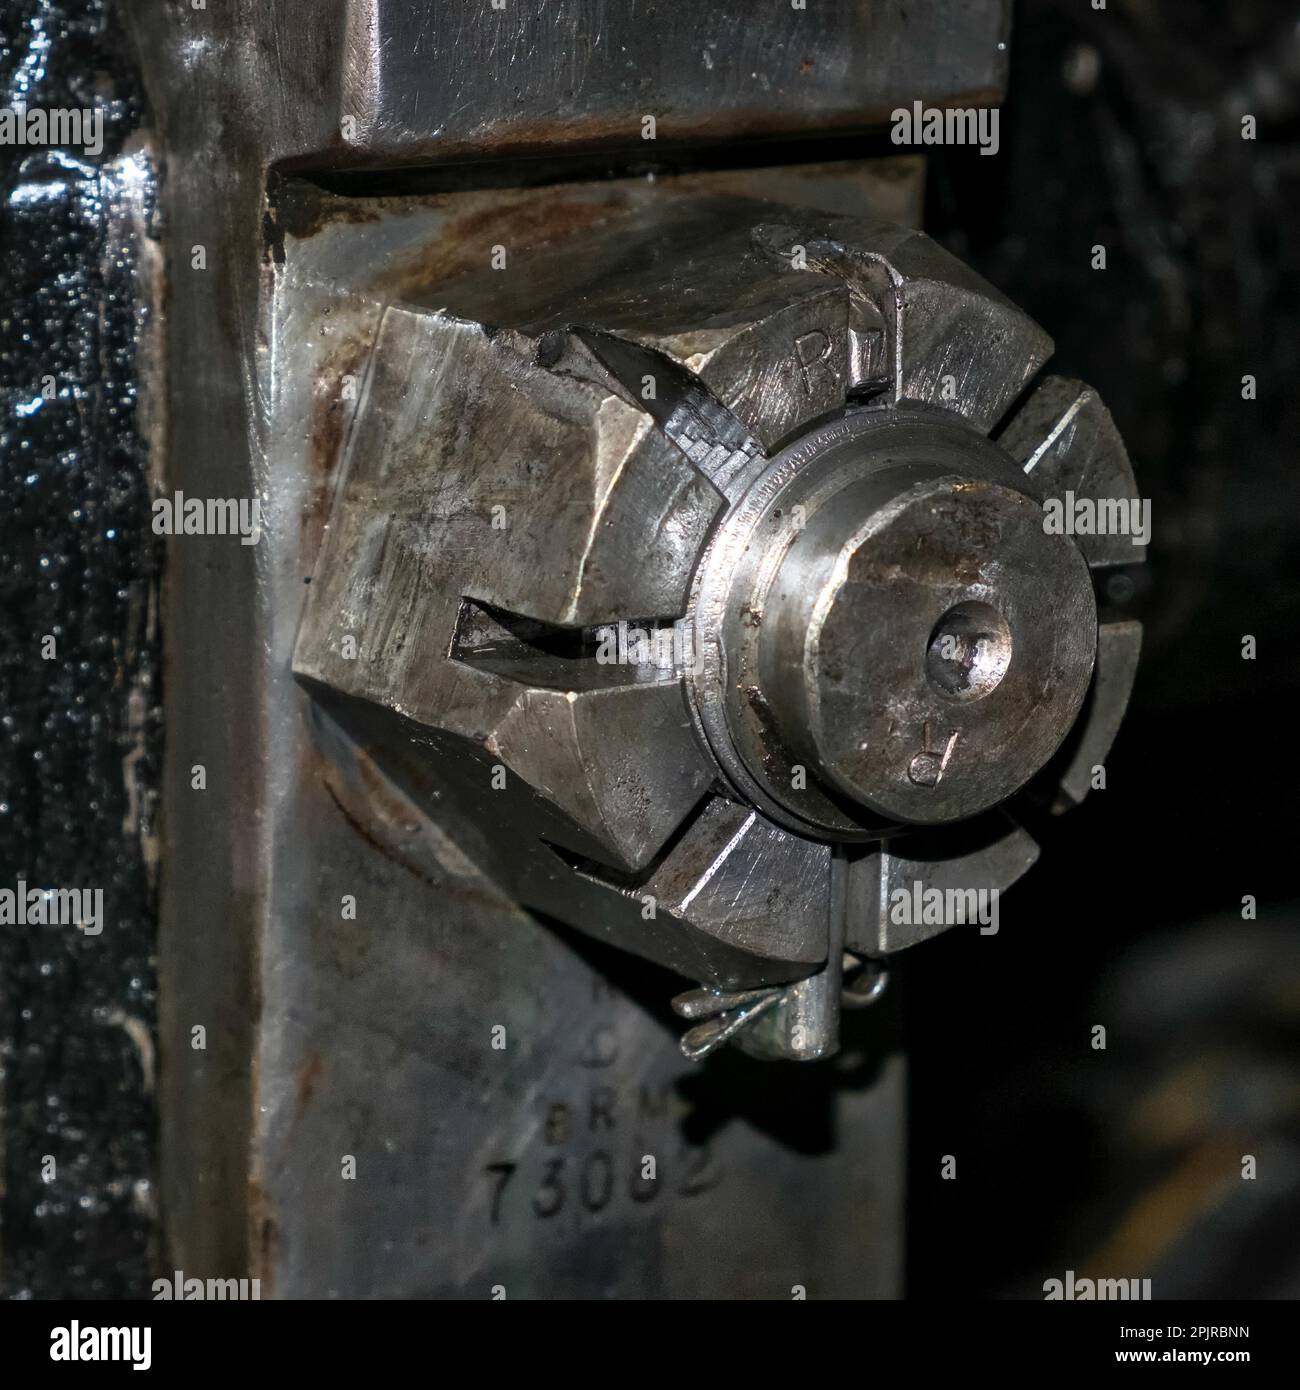 Steel nut on an old steam train Stock Photo